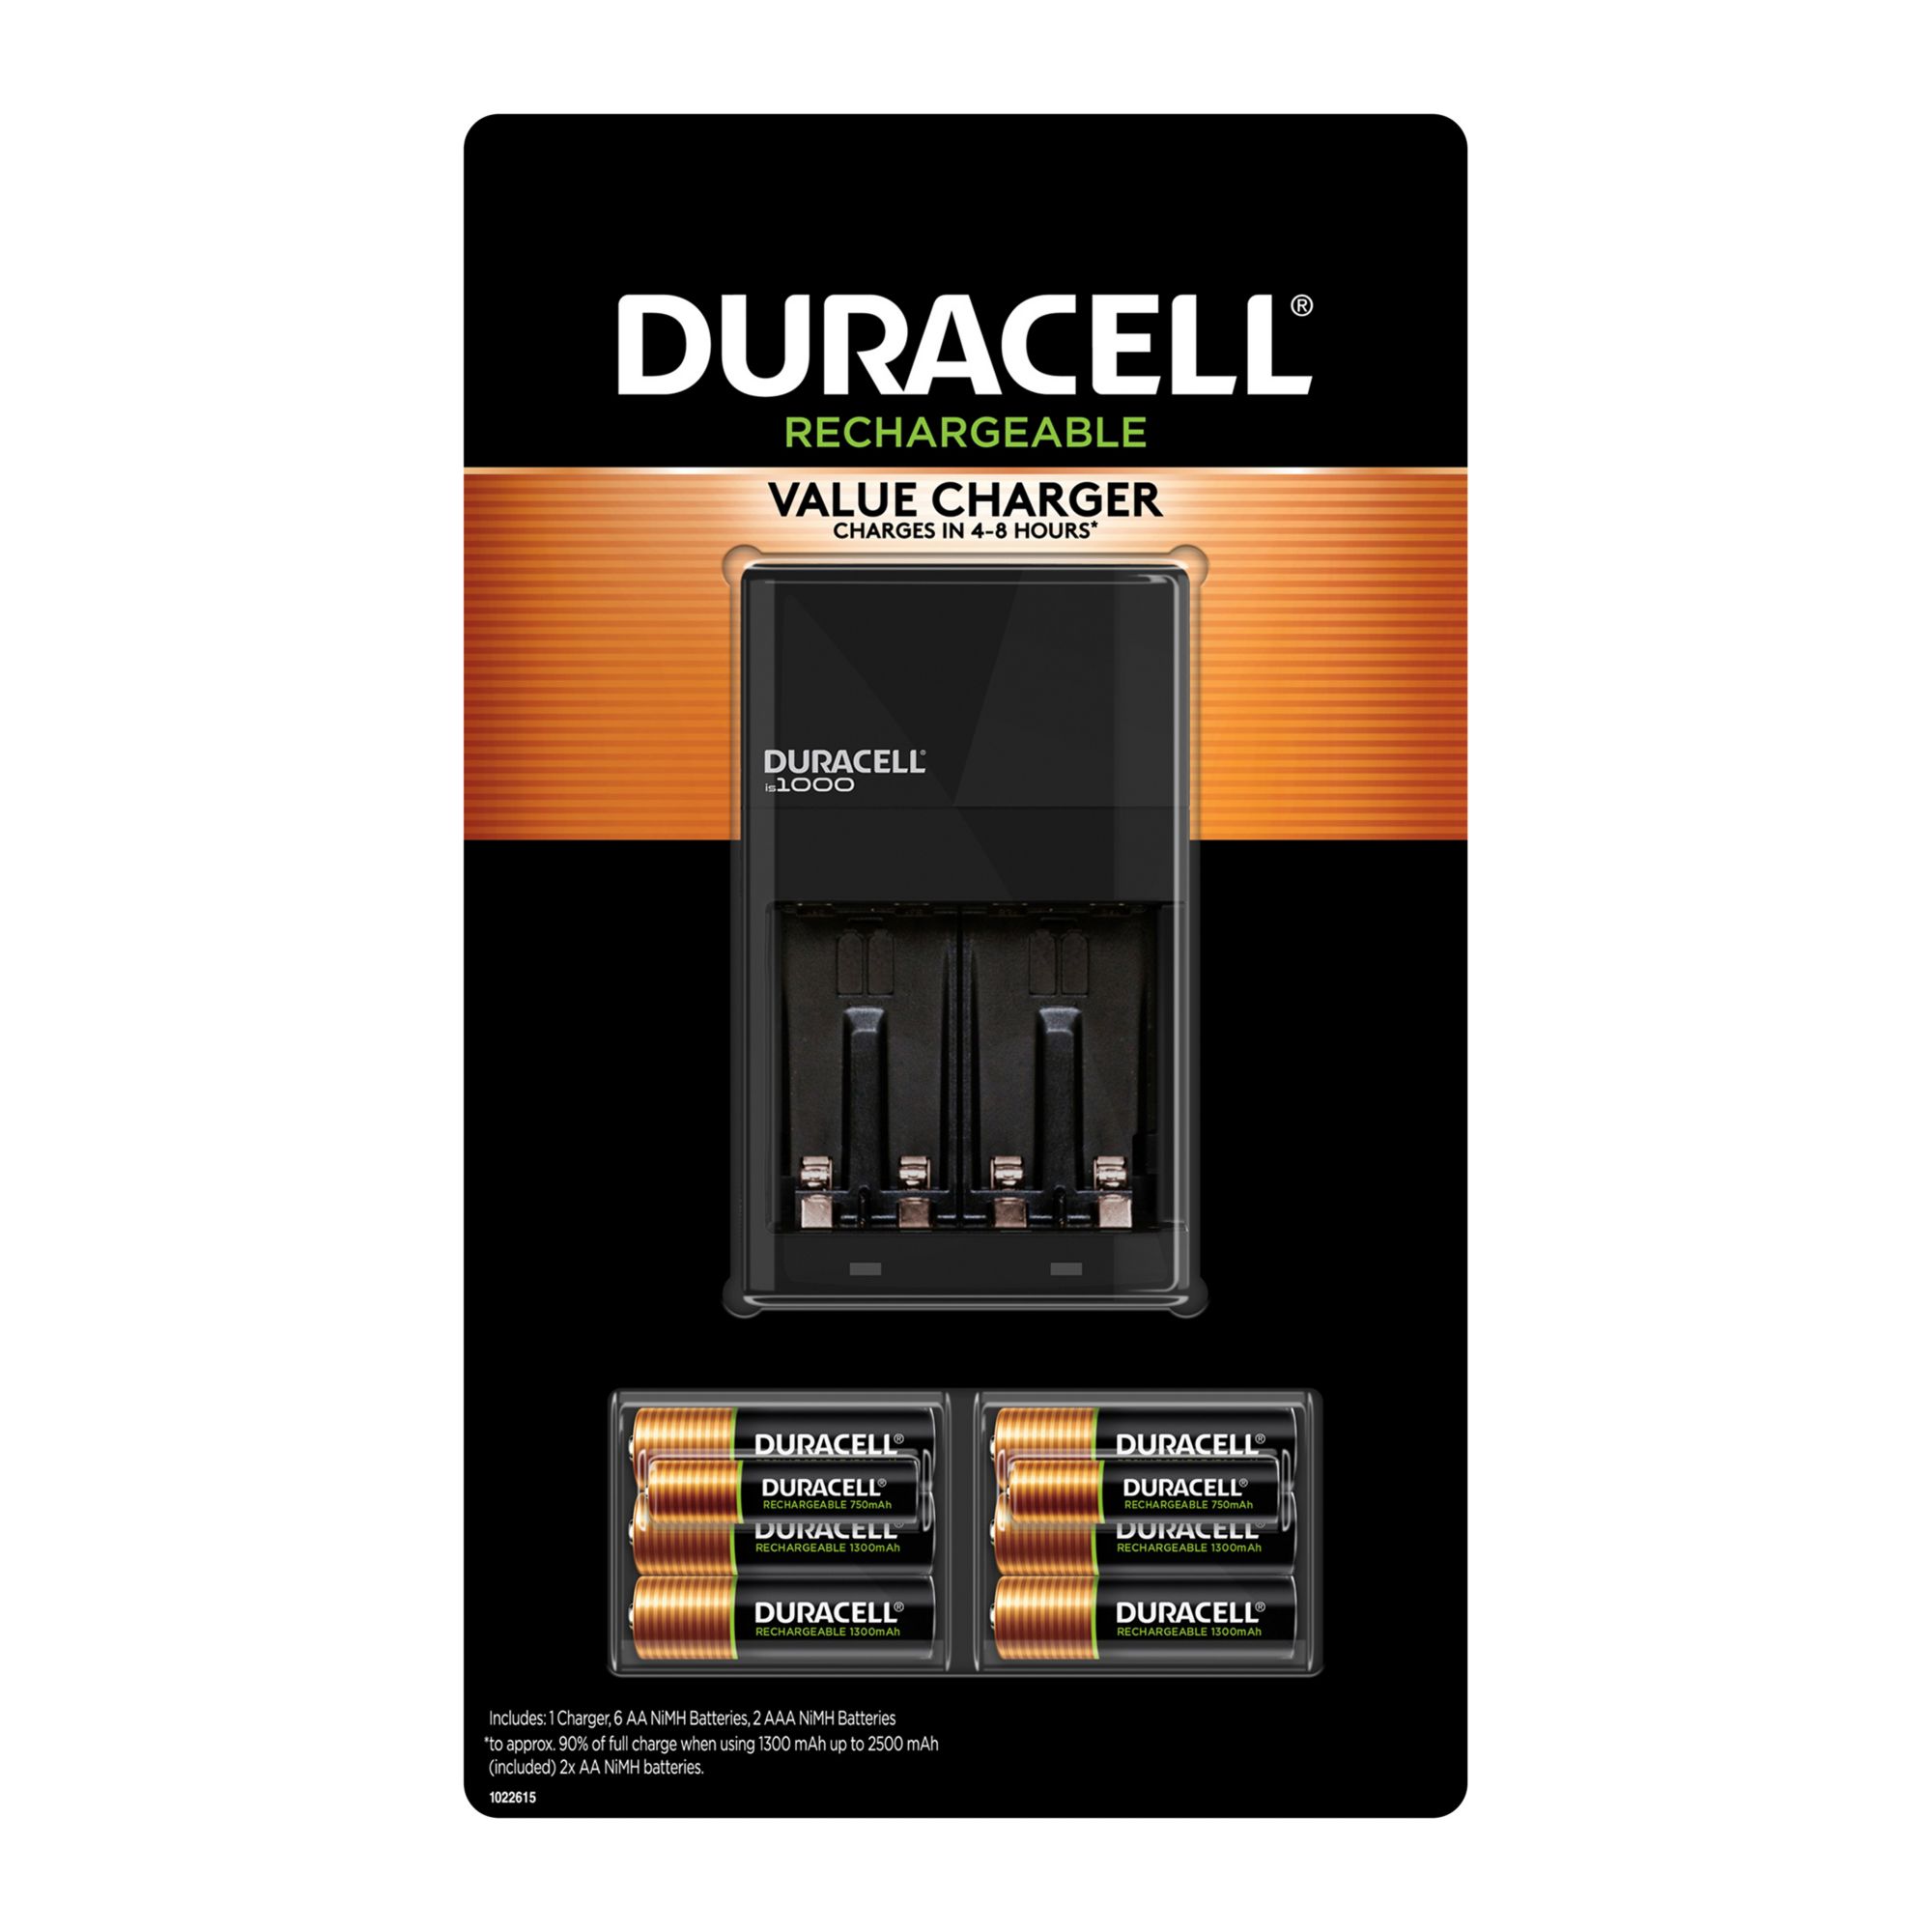 Duracell Rechargeable Long Life Ion Core AA NiMH RCHRGBLQ B&H